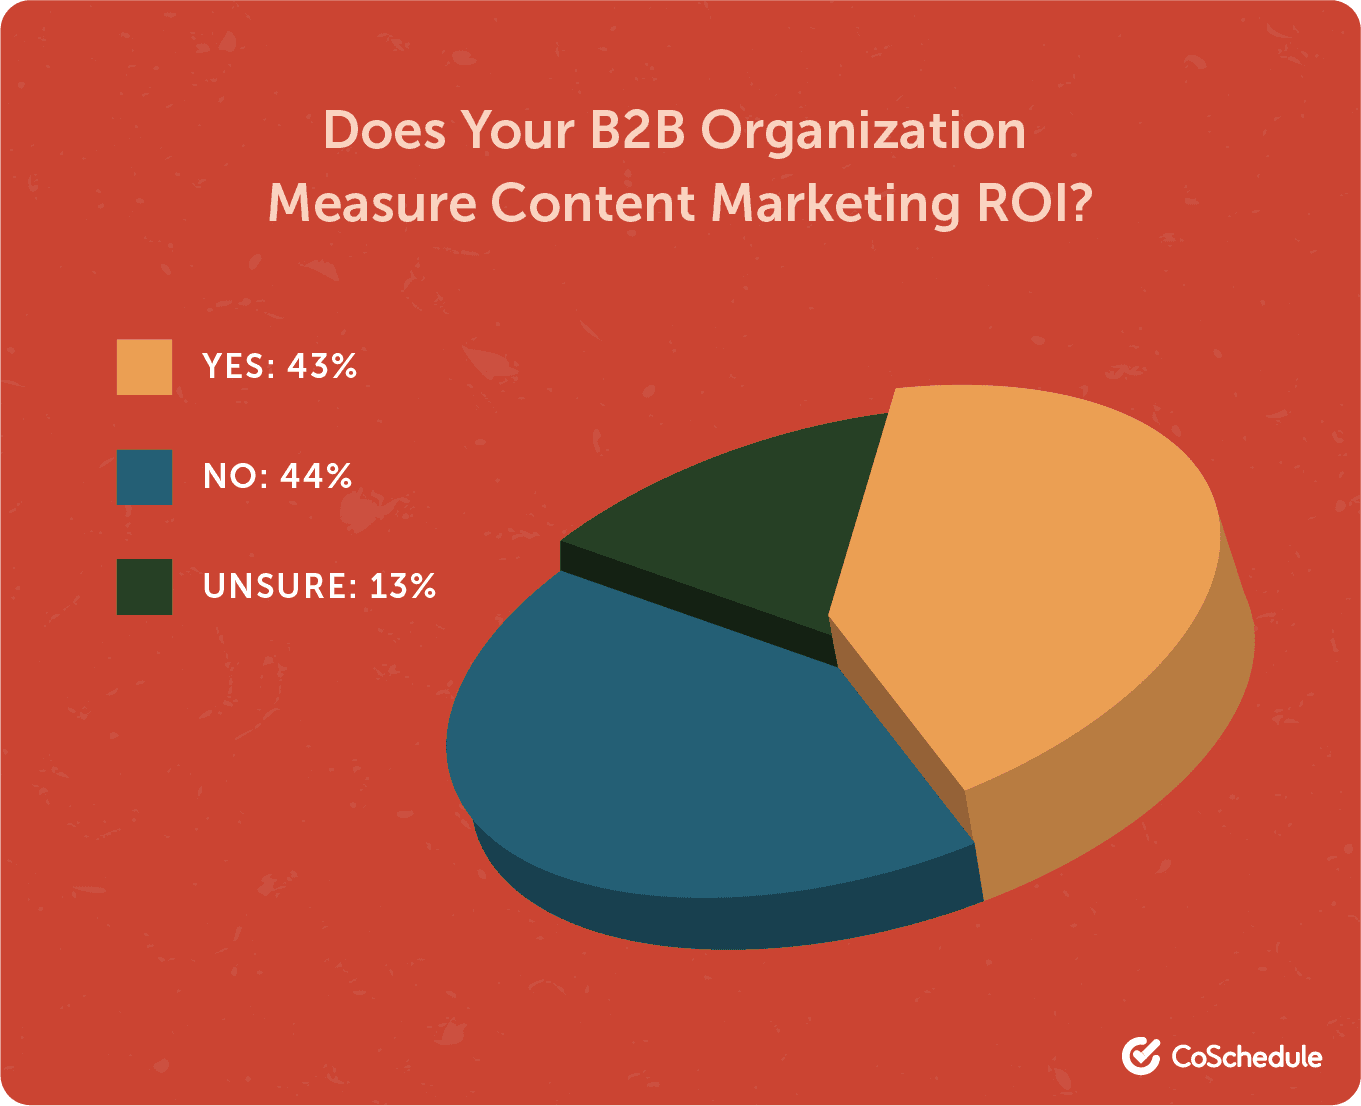 Amount of organizations that measure content marketing ROI